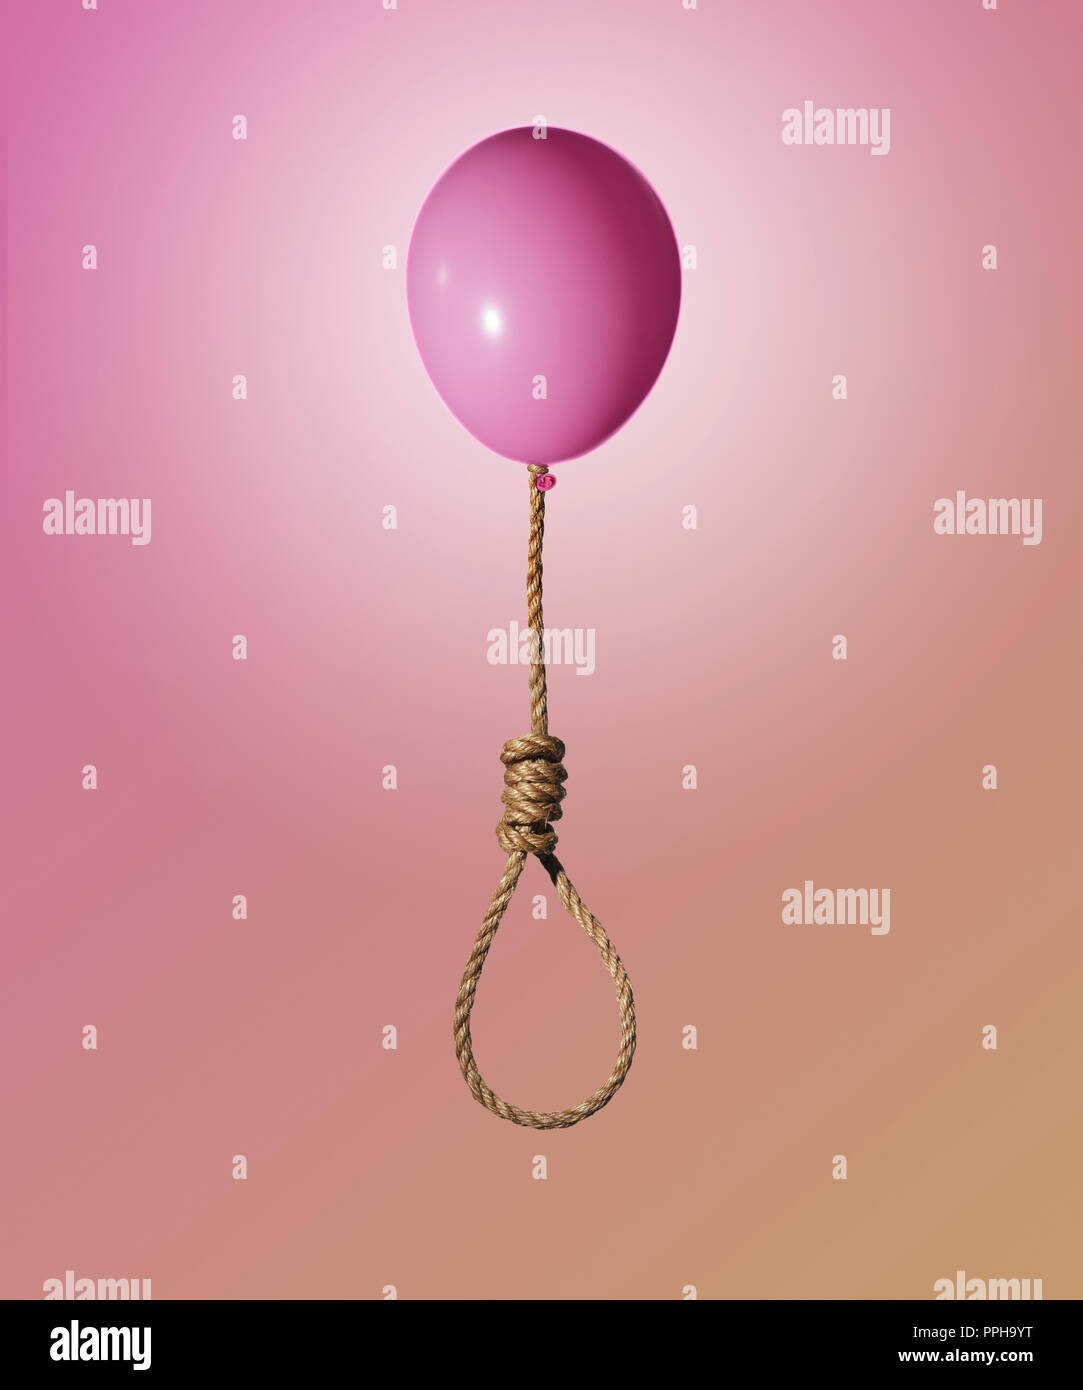 Pink Balloon lifting a jute rope and hangman's noose knot concept Stock Photo